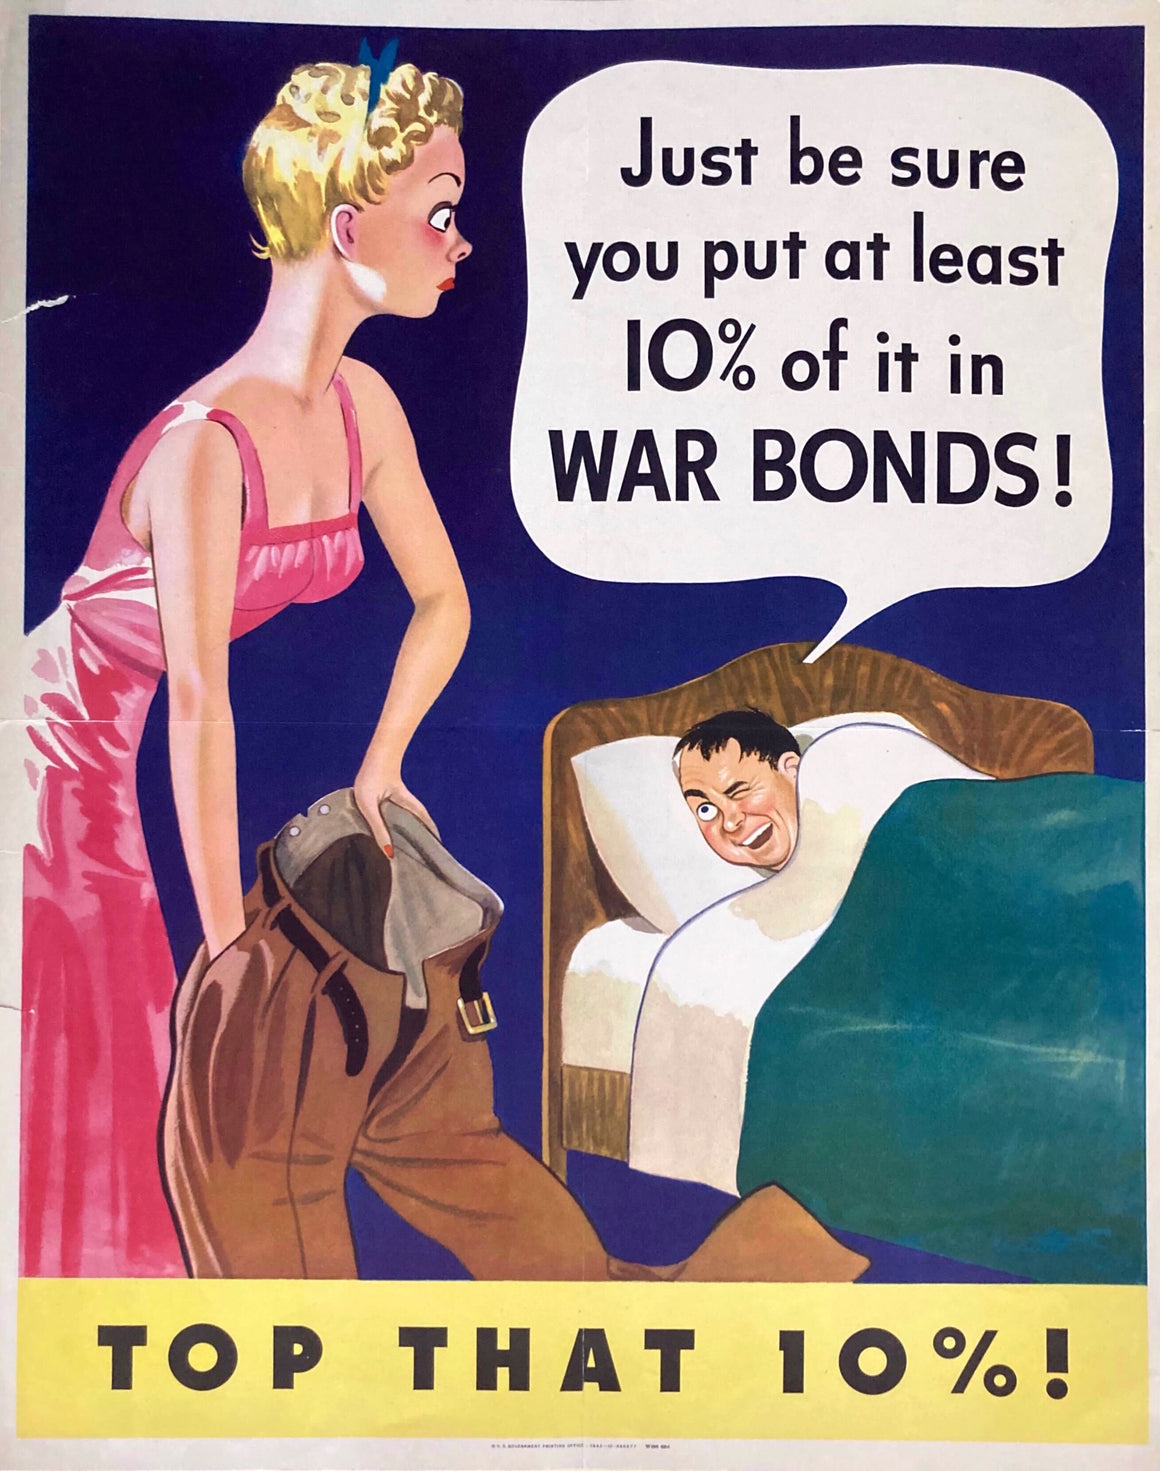 "Just be sure you put at least 10% of it in War Bonds! Top That 10%" Vintage WWII Bonds Poster, 1943